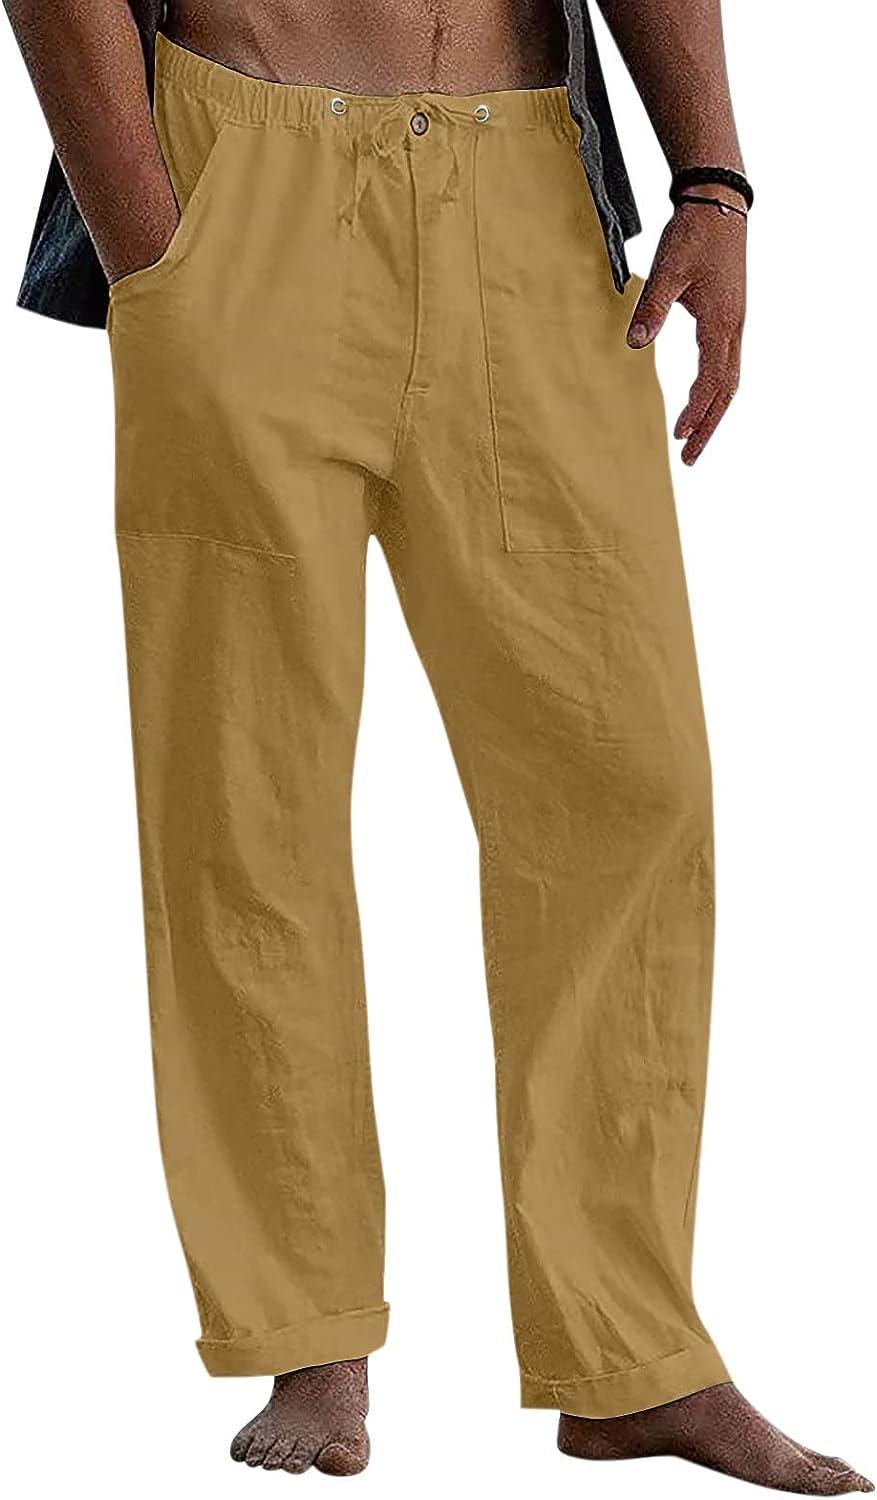 YHAIOGS Outdoor Male Casual Solid Trouser Pant Full Length Loose